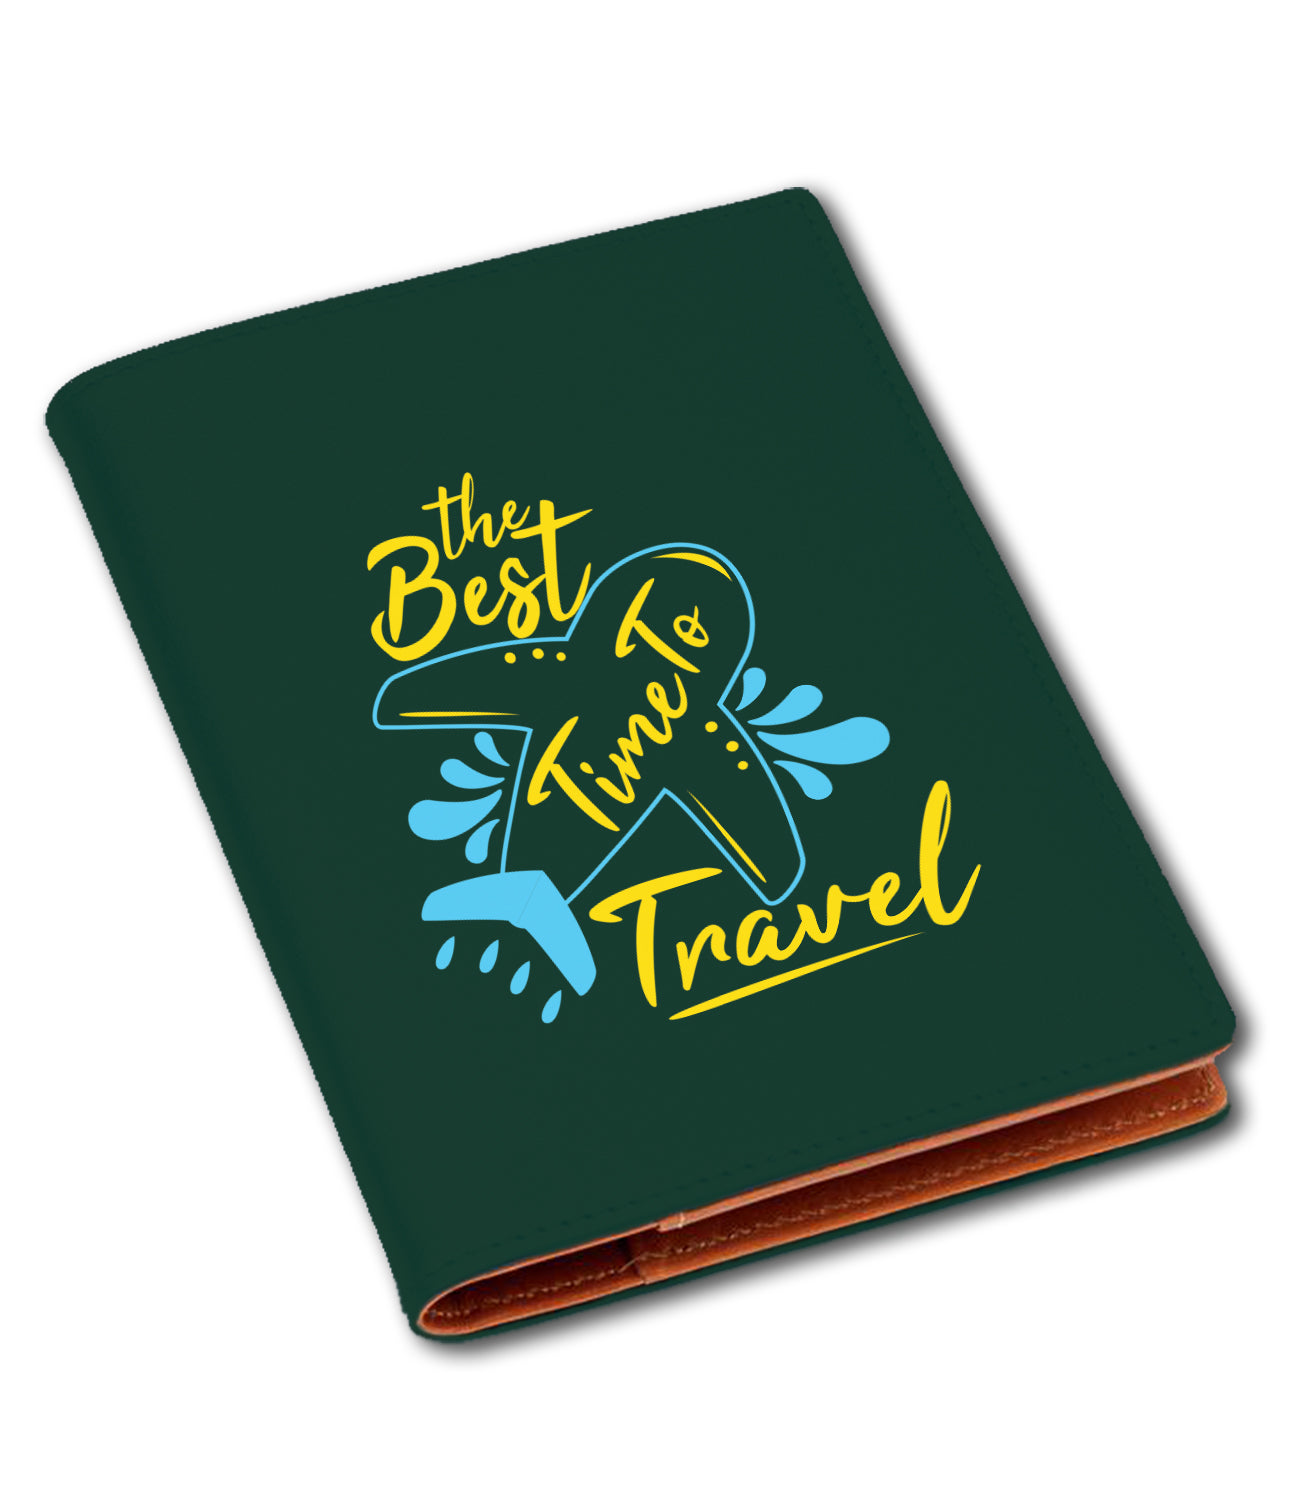 Vegan Leather Best Time to Travel Canvas Passport Cover/Holder